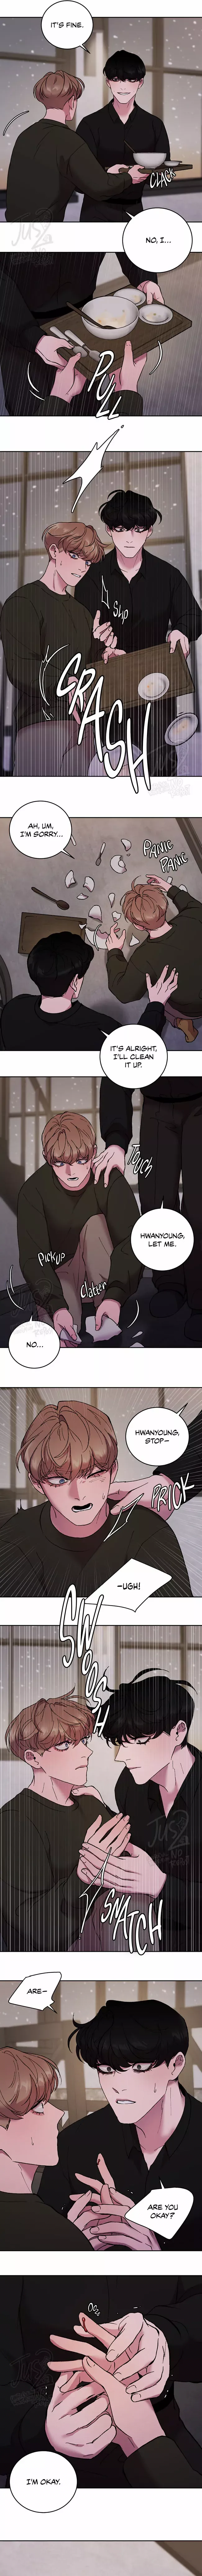 Hwang Young's Misery - chapter 31 - #5